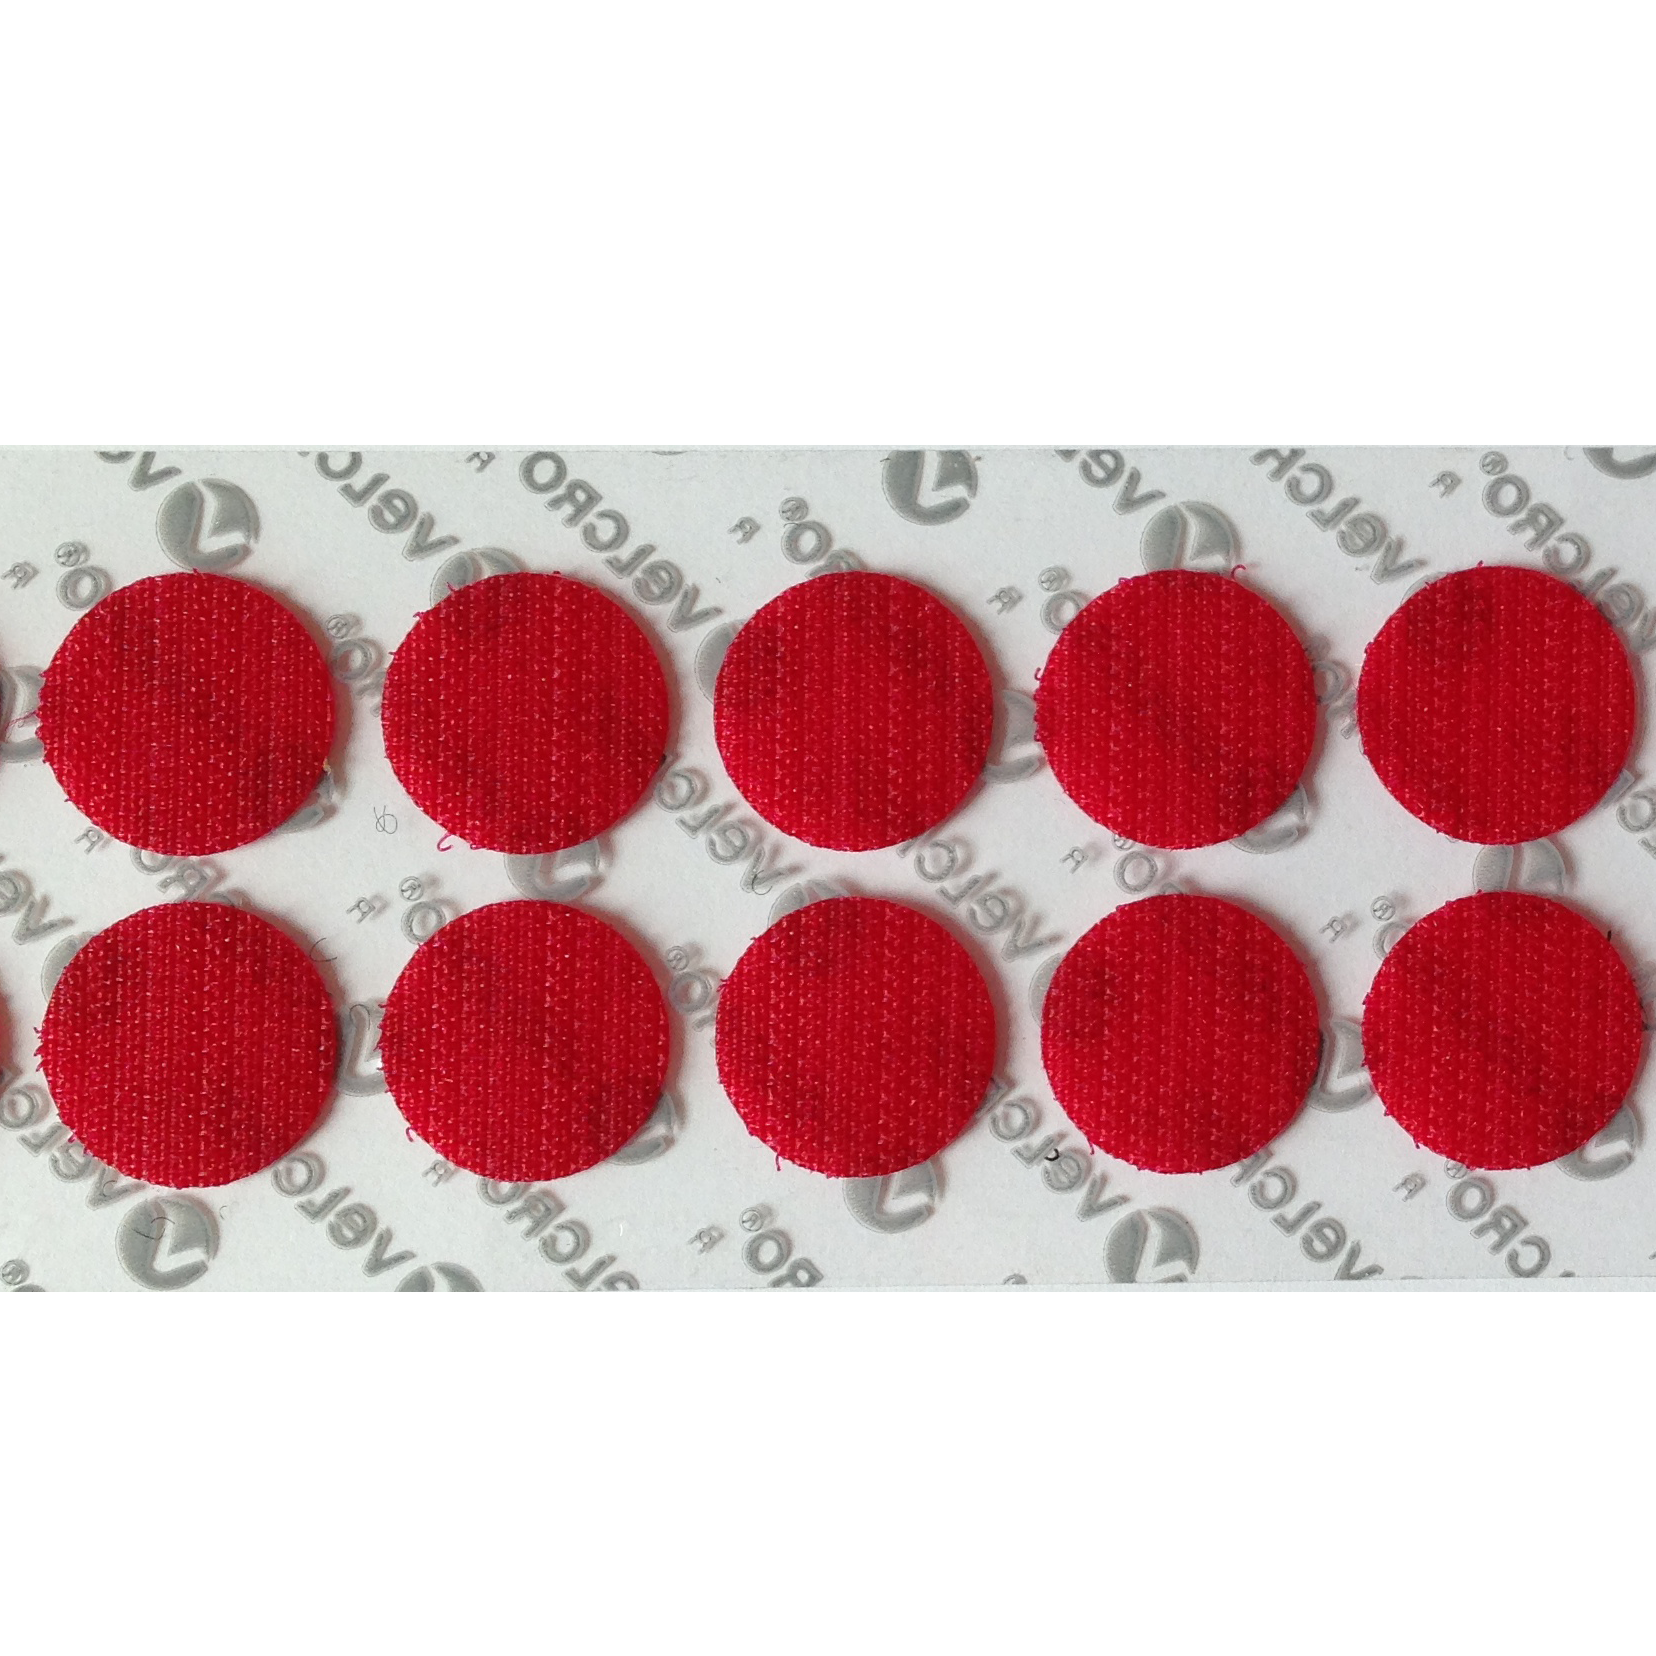 1/2 RED VELCRO® BRAND VELCOIN® LOOP ADHESIVE BACKED - COINS, CIRCLES, &  DOTS